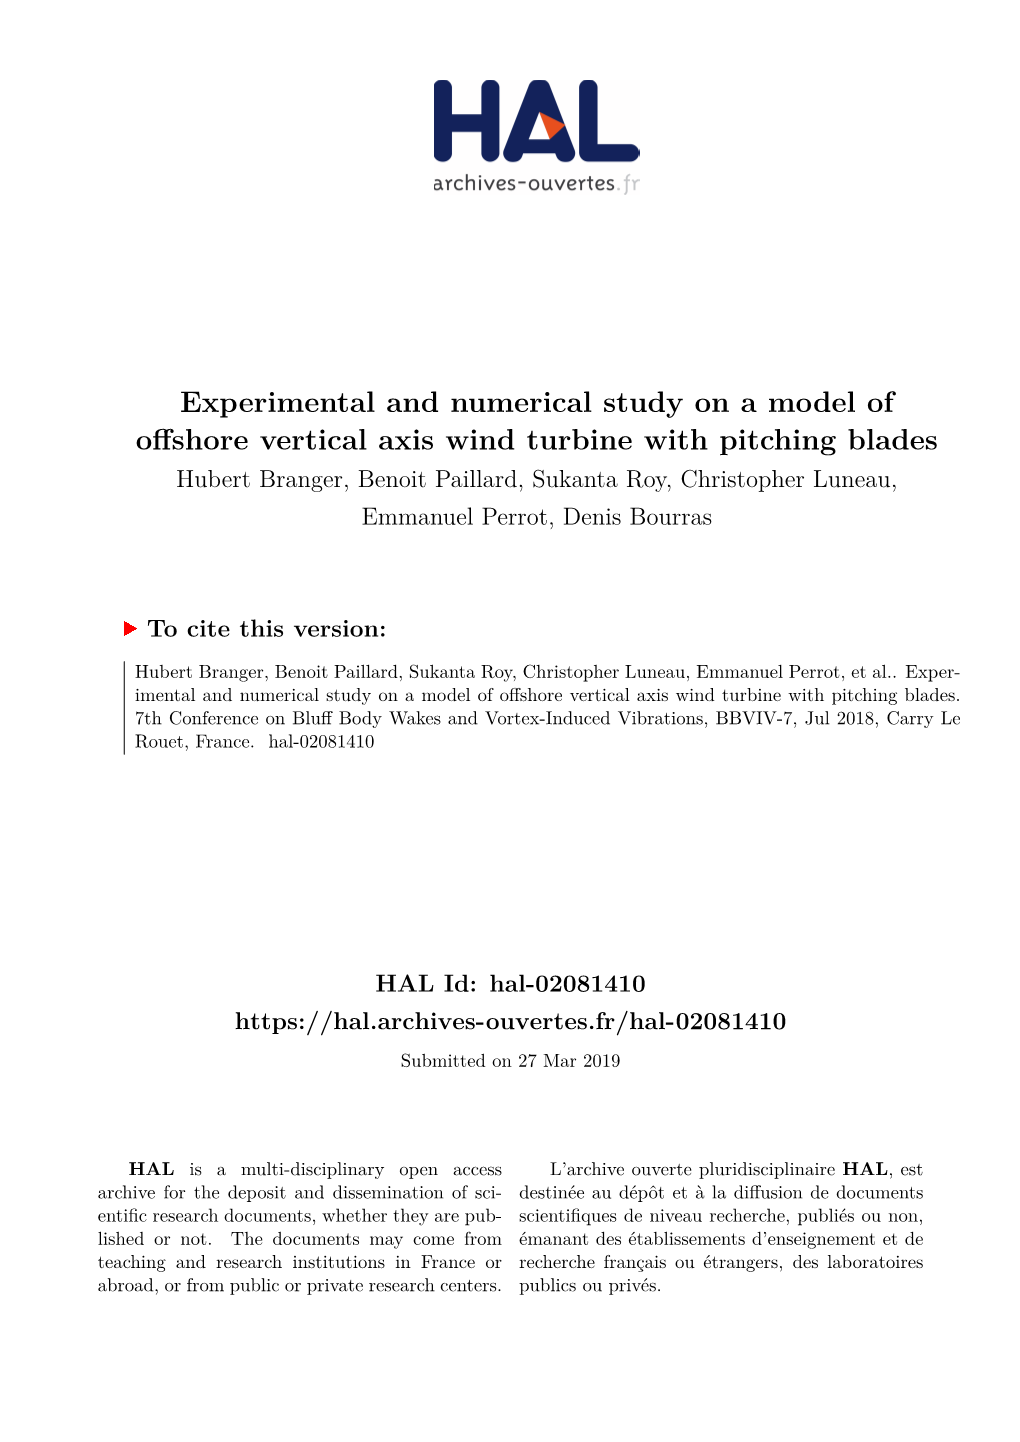 Experimental and Numerical Study on a Model of Offshore Vertical Axis